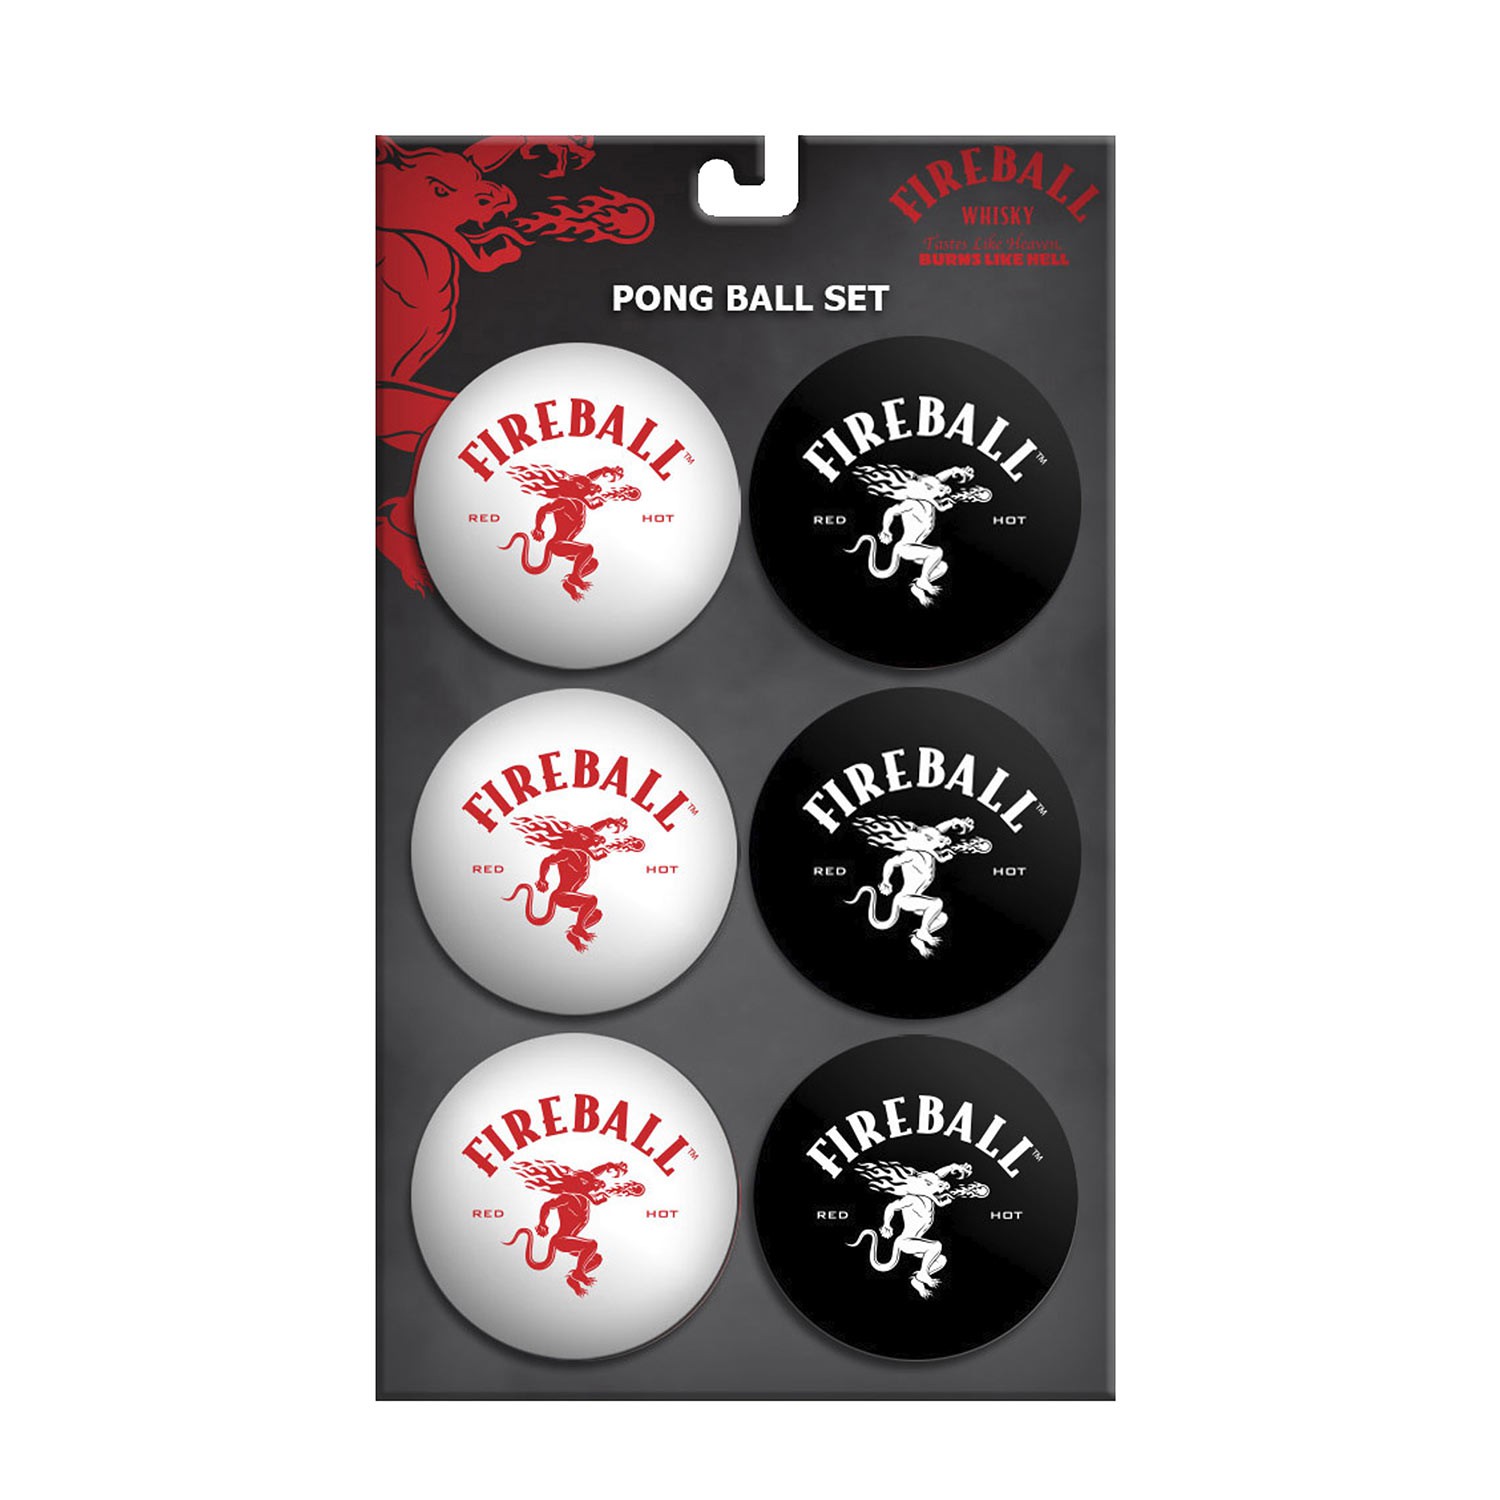 PARTY DRINKING BAR GAME FIREBALL WHISKY BEER PONG BALL SET PACK OF 6 BALLS 